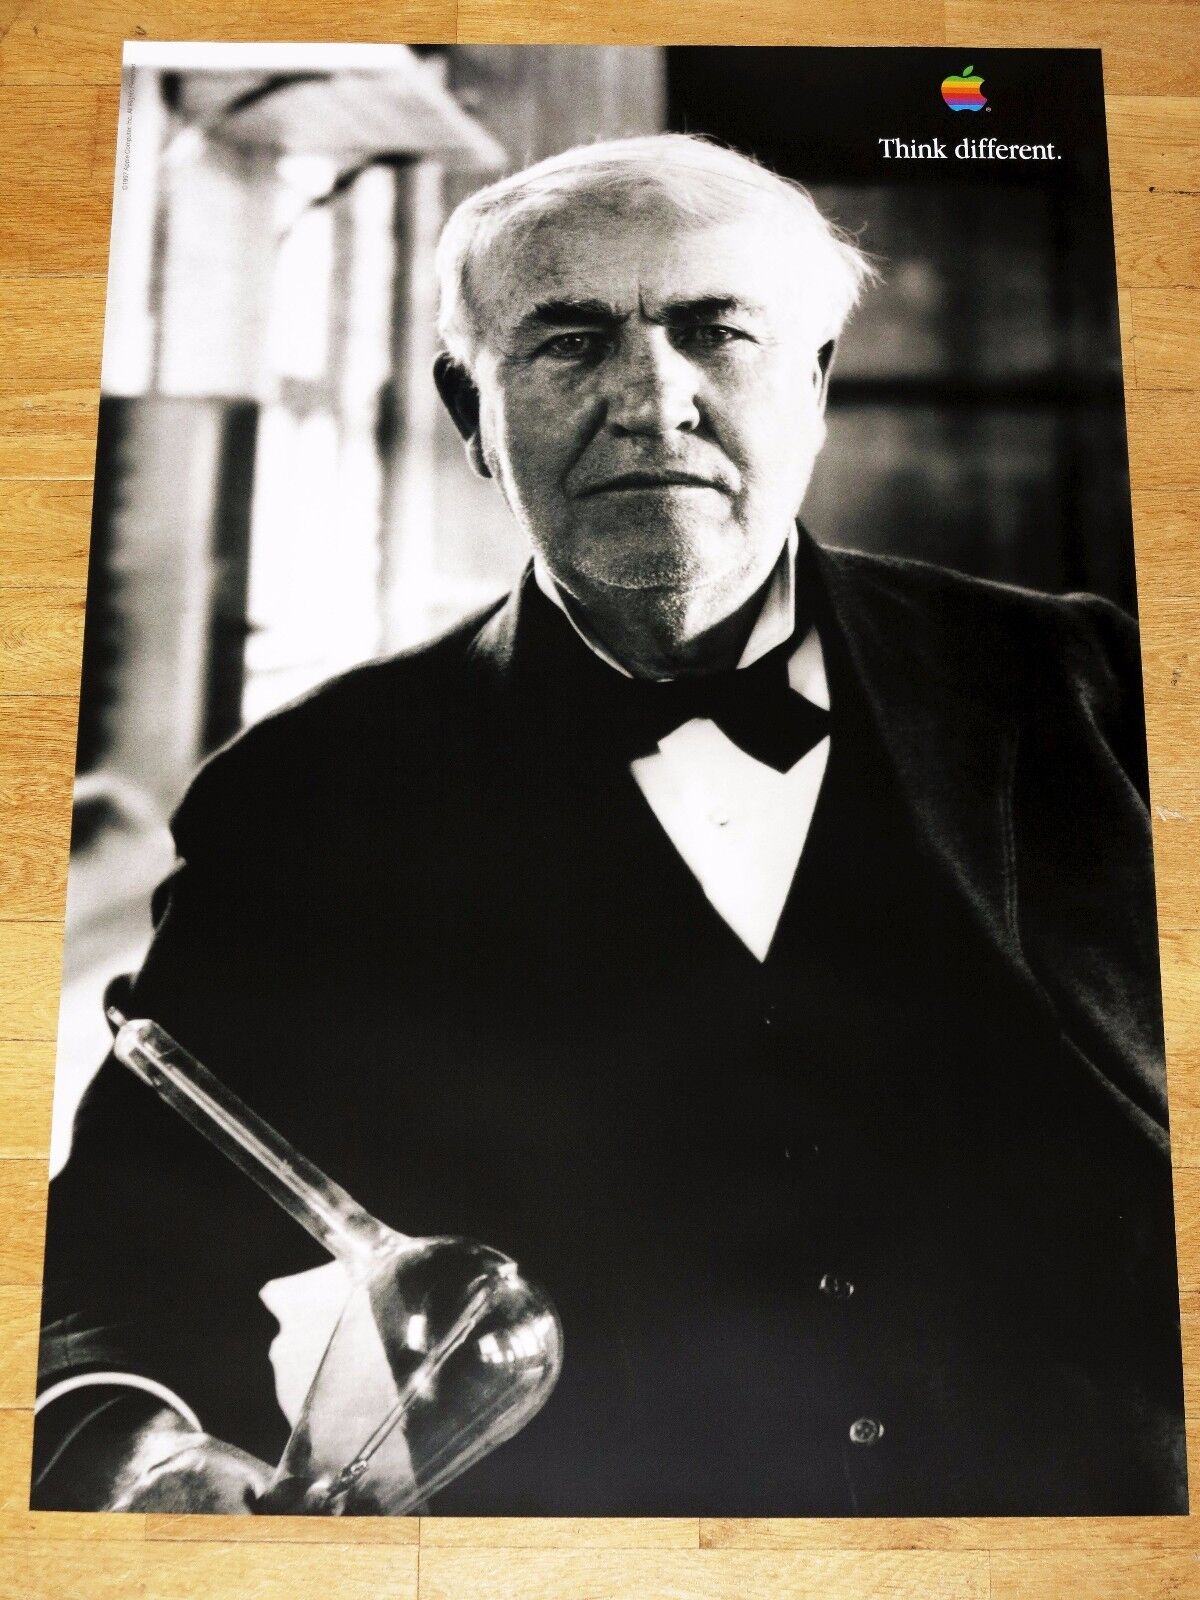 APPLE THINK DIFFERENT POSTER - THOMAS EDISON / 24 x 36 by STEVE JOBS 91 x 61 cm